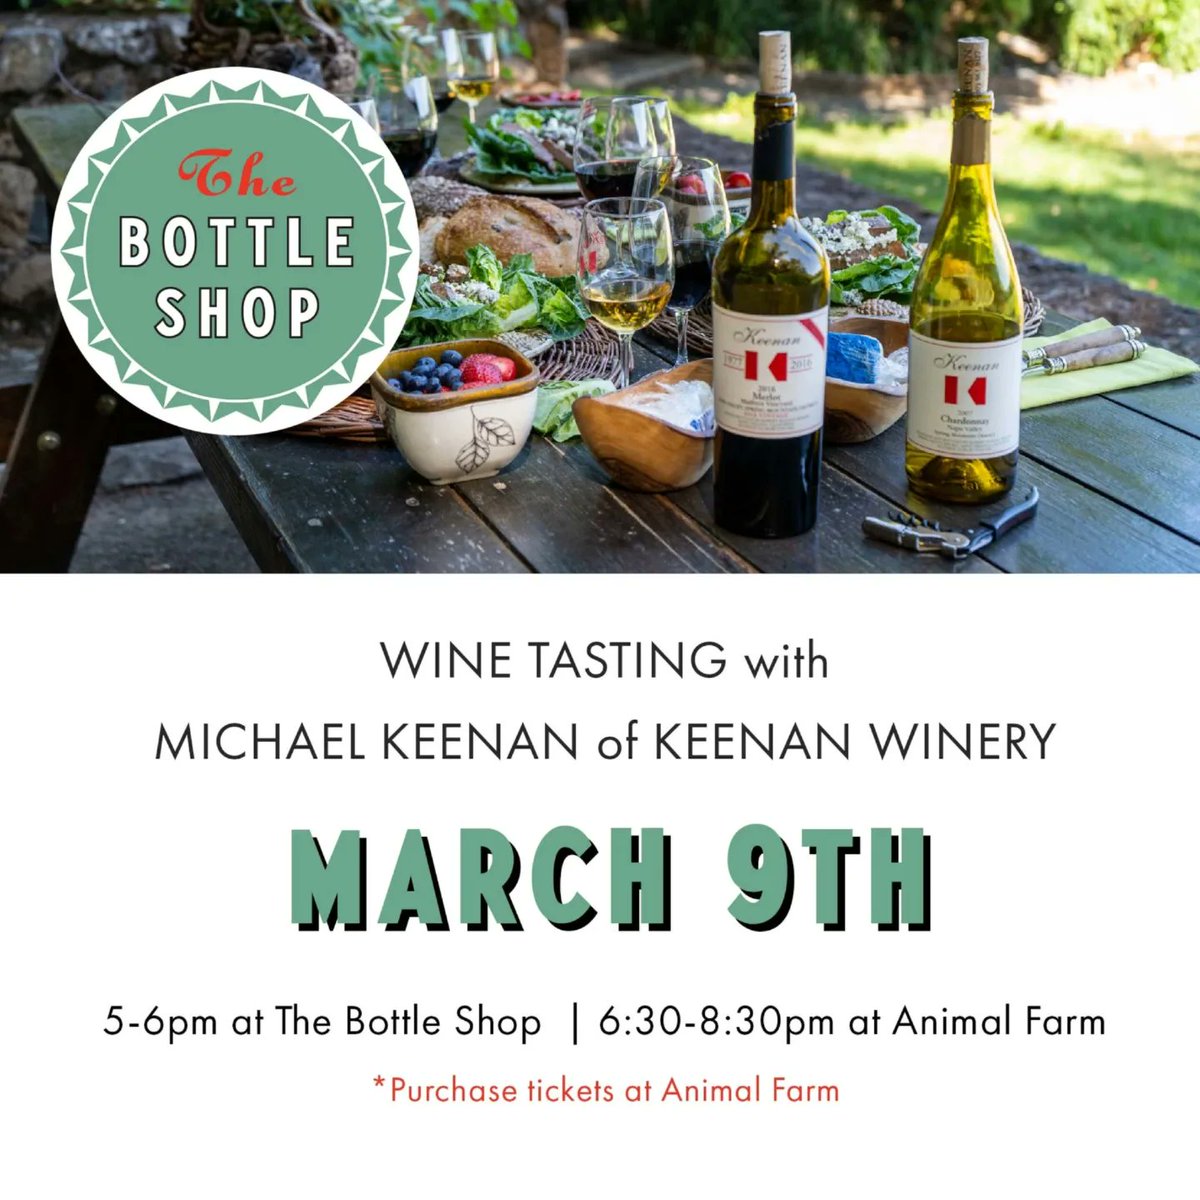 Be sure to join us Thursday (3/9) to meet Michael Keenan with @KeenanWinery and taste some of their amazing wines! Appetizers will be served with the wines for the Animal Farm portion with tickets available at the door. #CAwine #springmountain